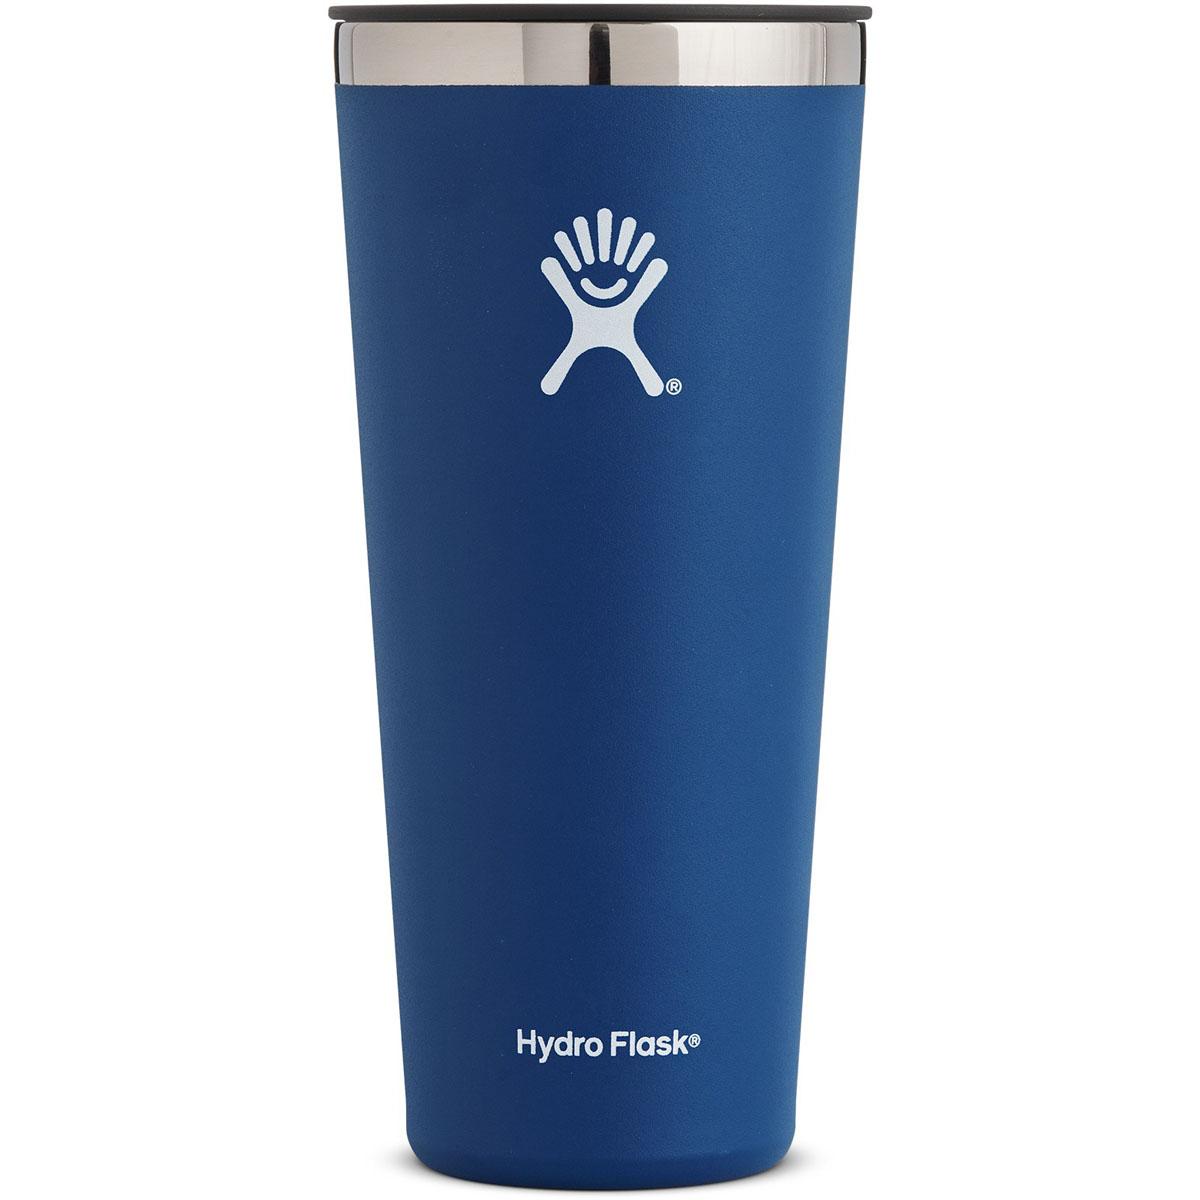 32floz Hydro Flask Trumbler for $14.73